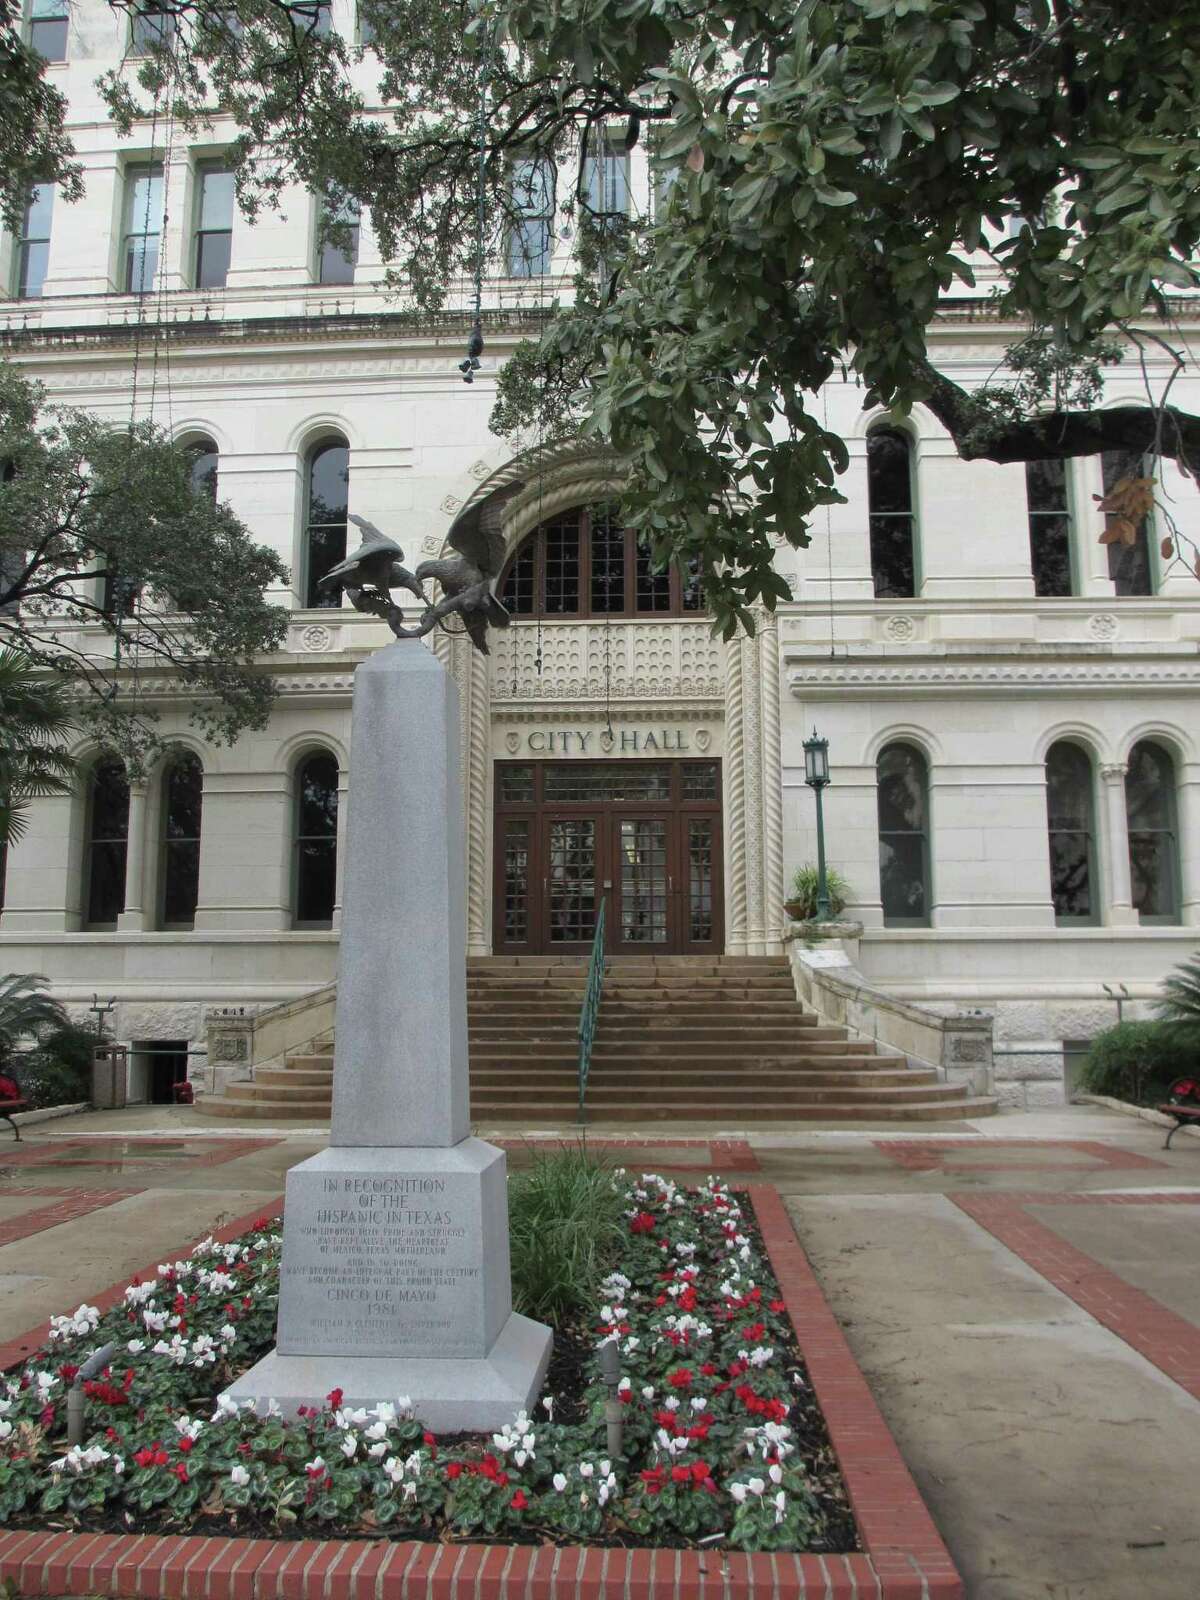 A monument in front of San Antonio City Hall pays tribute to the role of Hispanics in "keeping alive the heartbeat of Mexico" and playing an integral role in the culture and character of the state. It was erected on Cinco de Mayo in 1981.